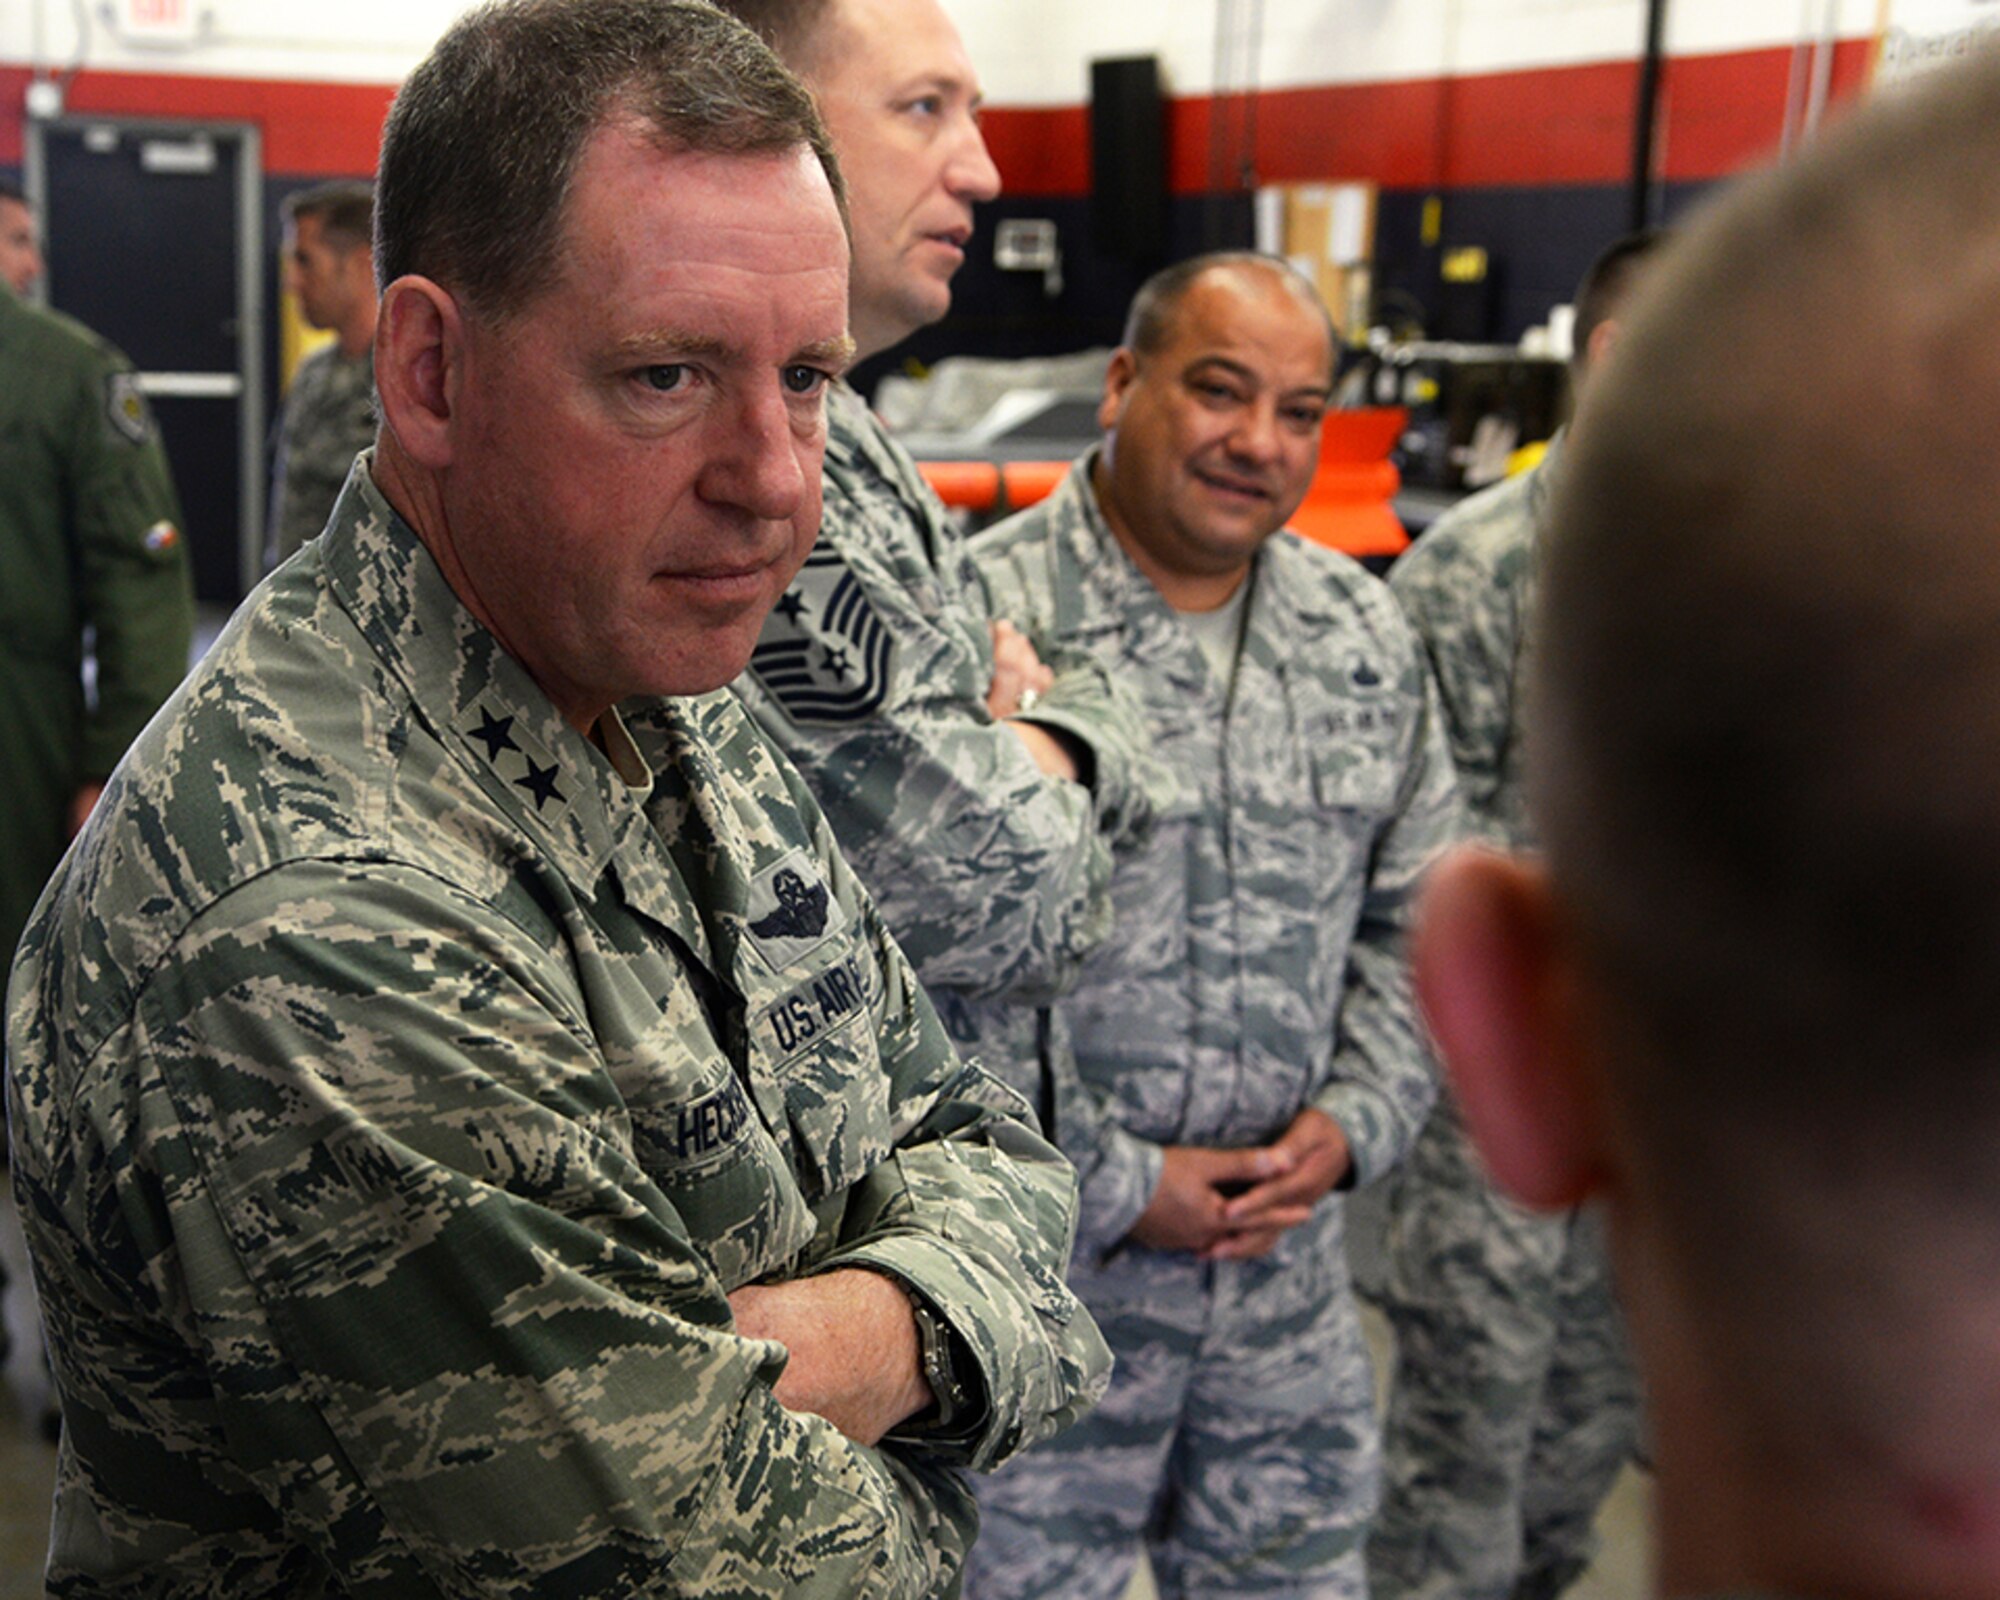 Maj. Gen. James Hecker, 19th Air Force commander, listens to Senior Master Sgt. Toby Henderson, the munitions flight chief for the 149th Fighter Wing, talk about location limitations during his visit Dec. 10 to Joint Base San Antonio-Lackland, Texas. The general took time to stop by several base units and listen to various members brief the commander about their work section. 
